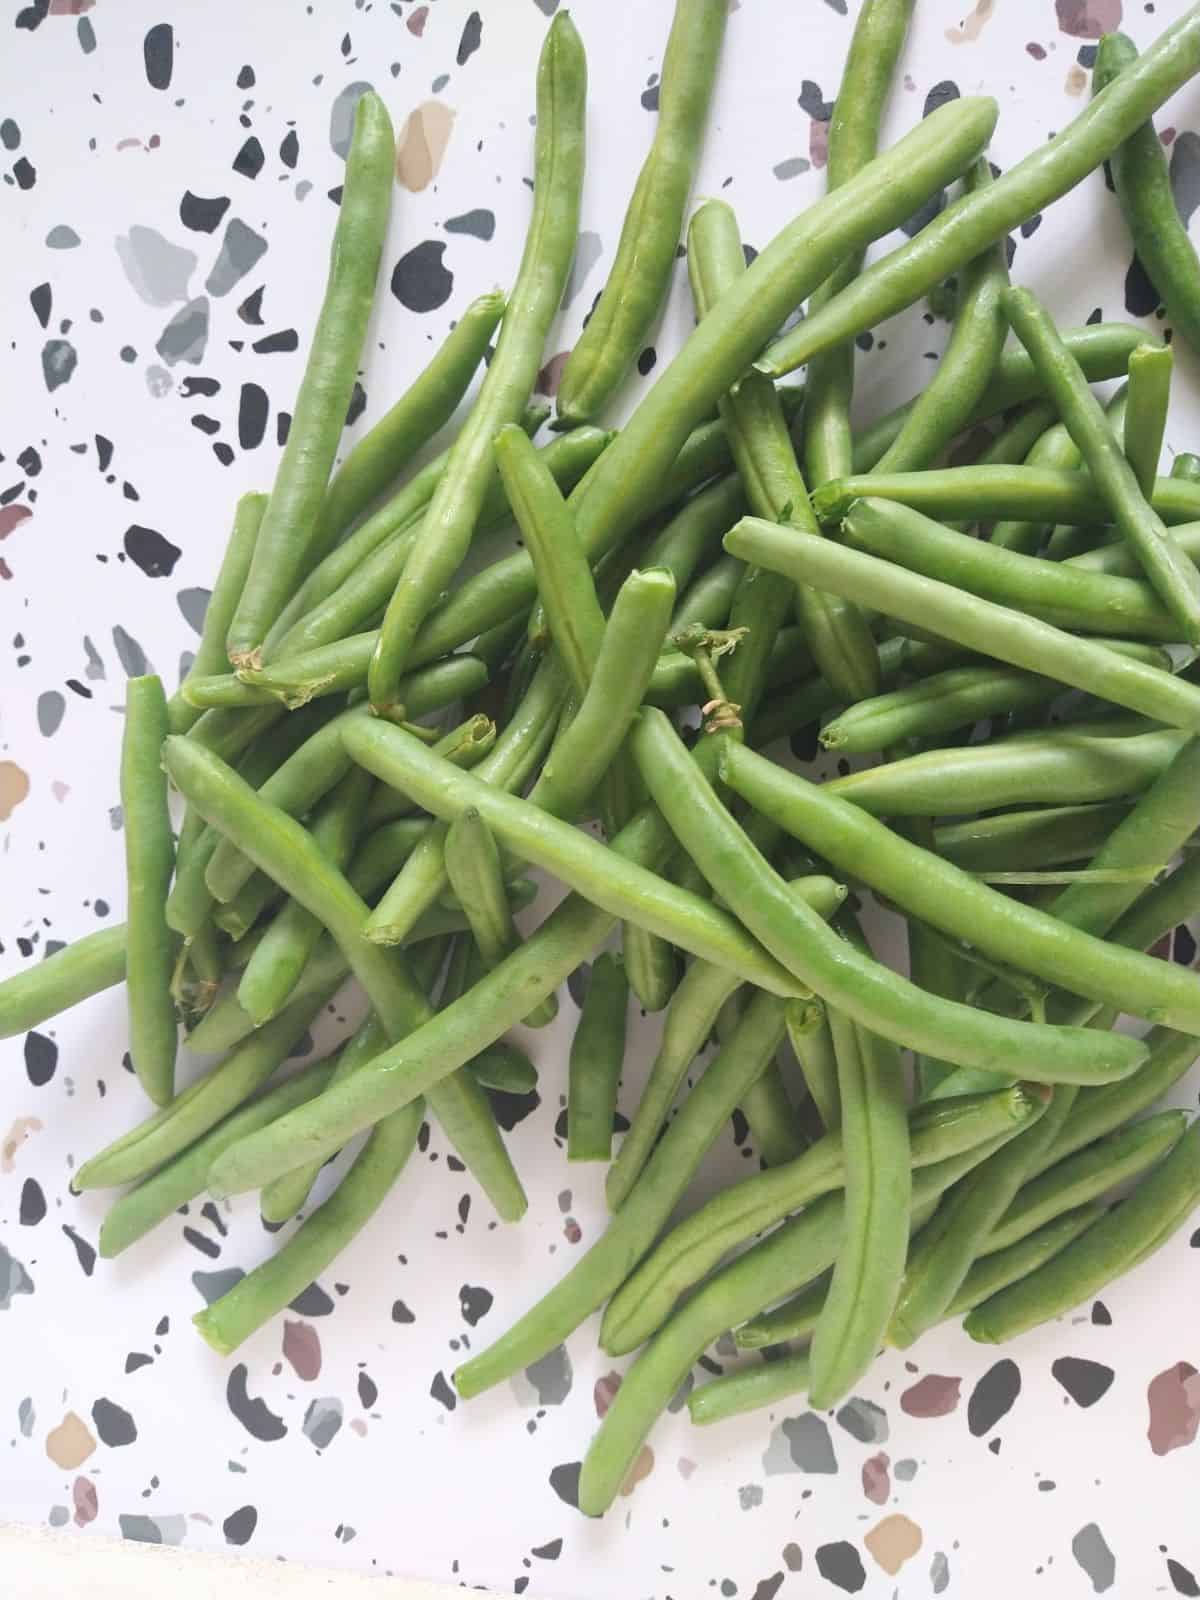 A pile of Green Beans on a white table with colored spots.